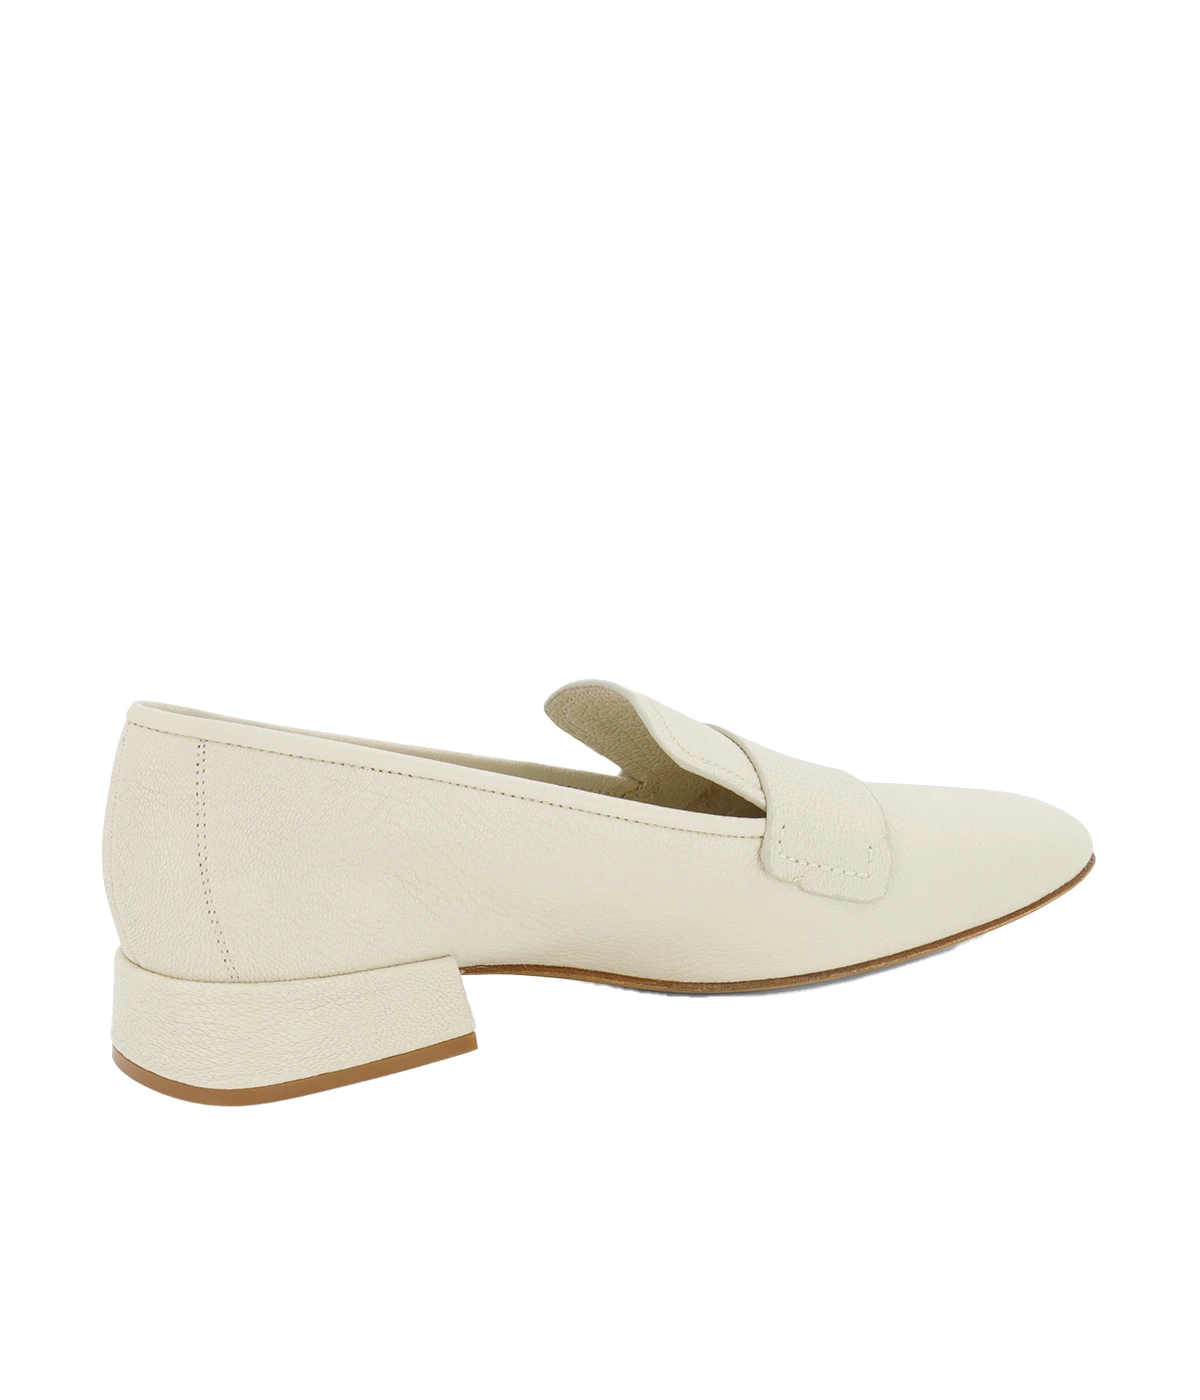 Galit Loafer in Ivory